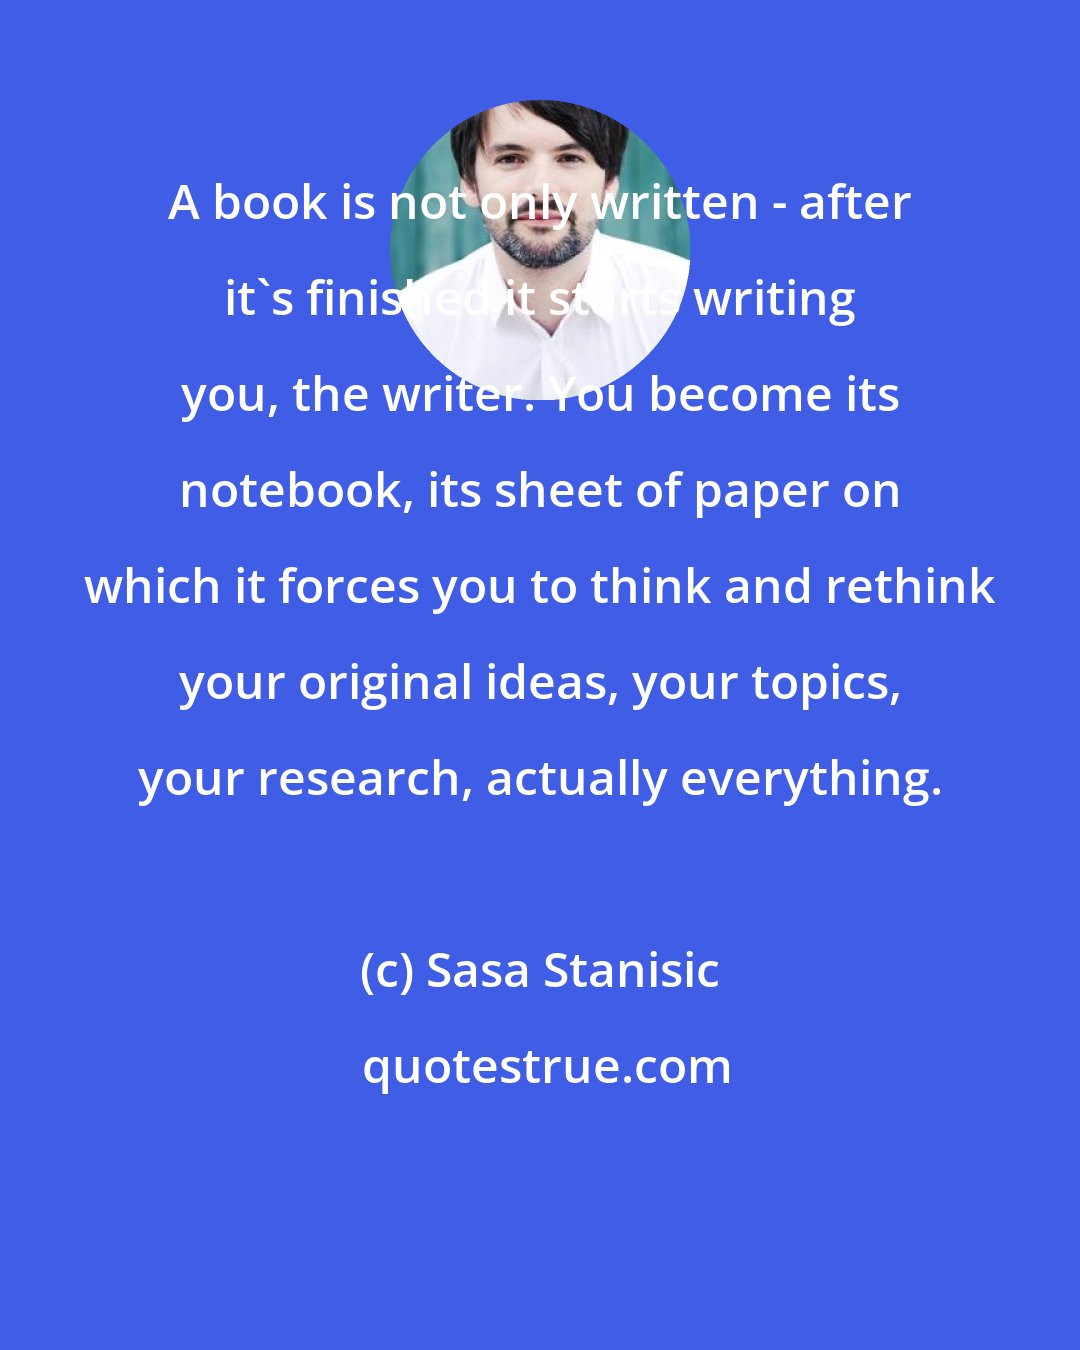 Sasa Stanisic: A book is not only written - after it's finished it starts writing you, the writer. You become its notebook, its sheet of paper on which it forces you to think and rethink your original ideas, your topics, your research, actually everything.